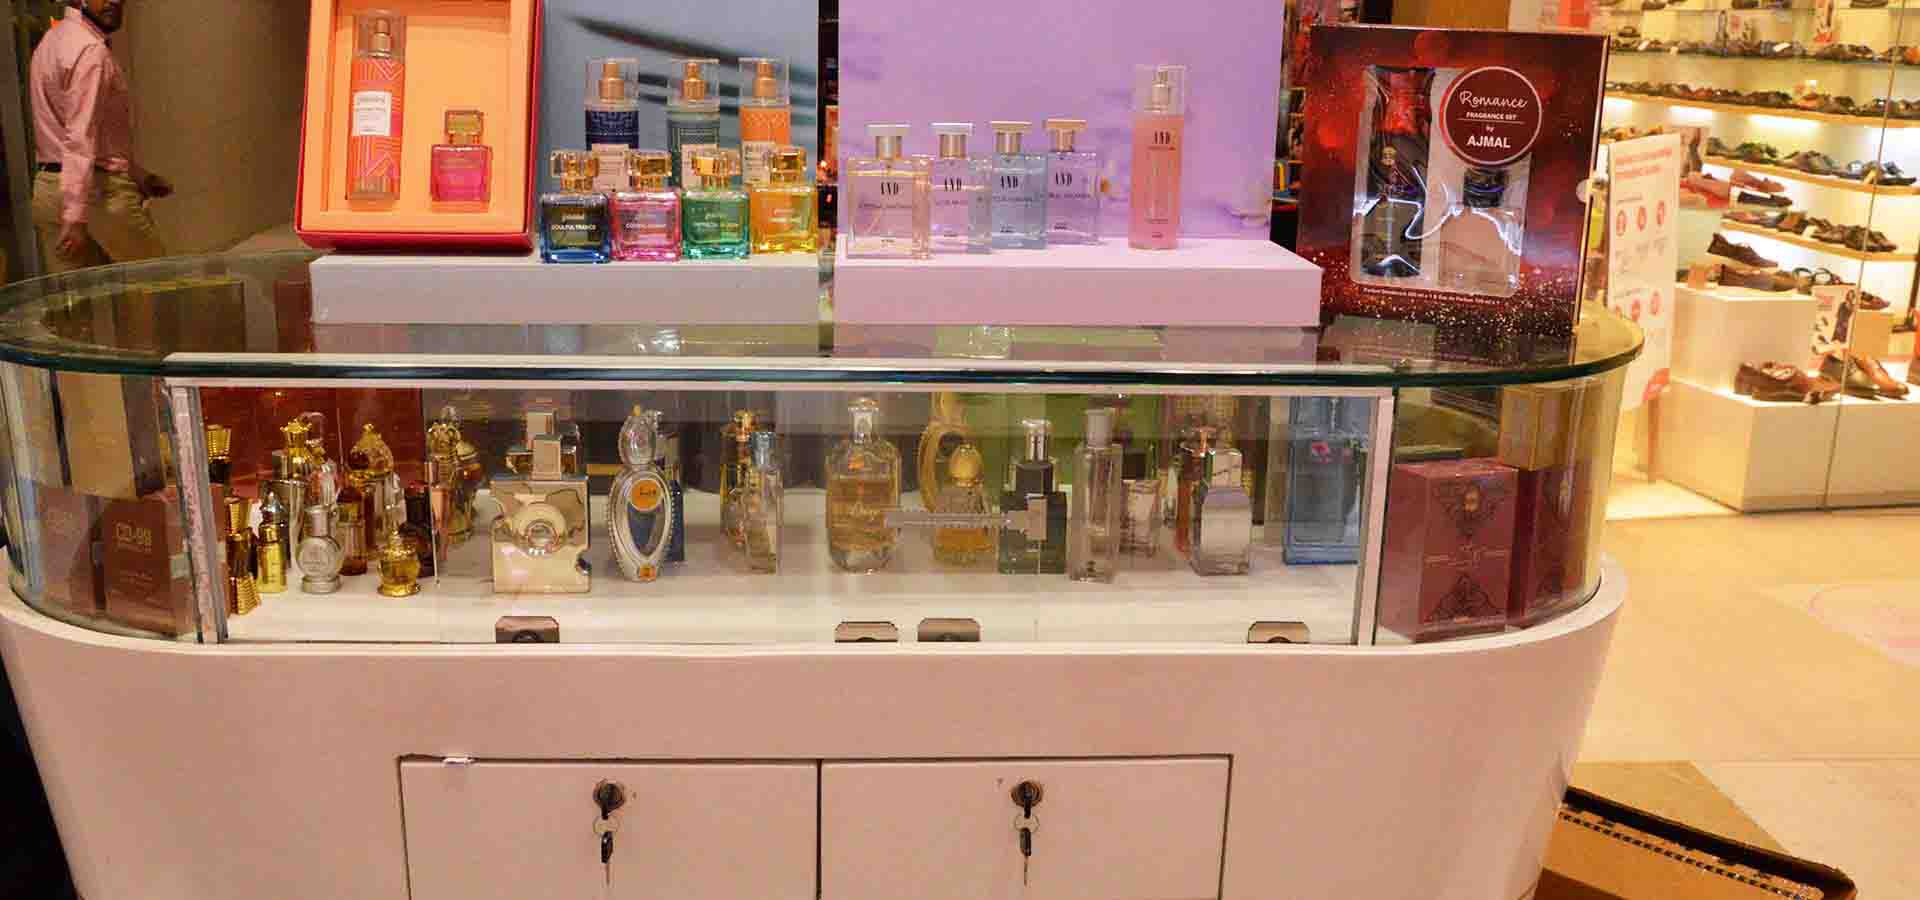 Ajmal Perfume store photos in mall